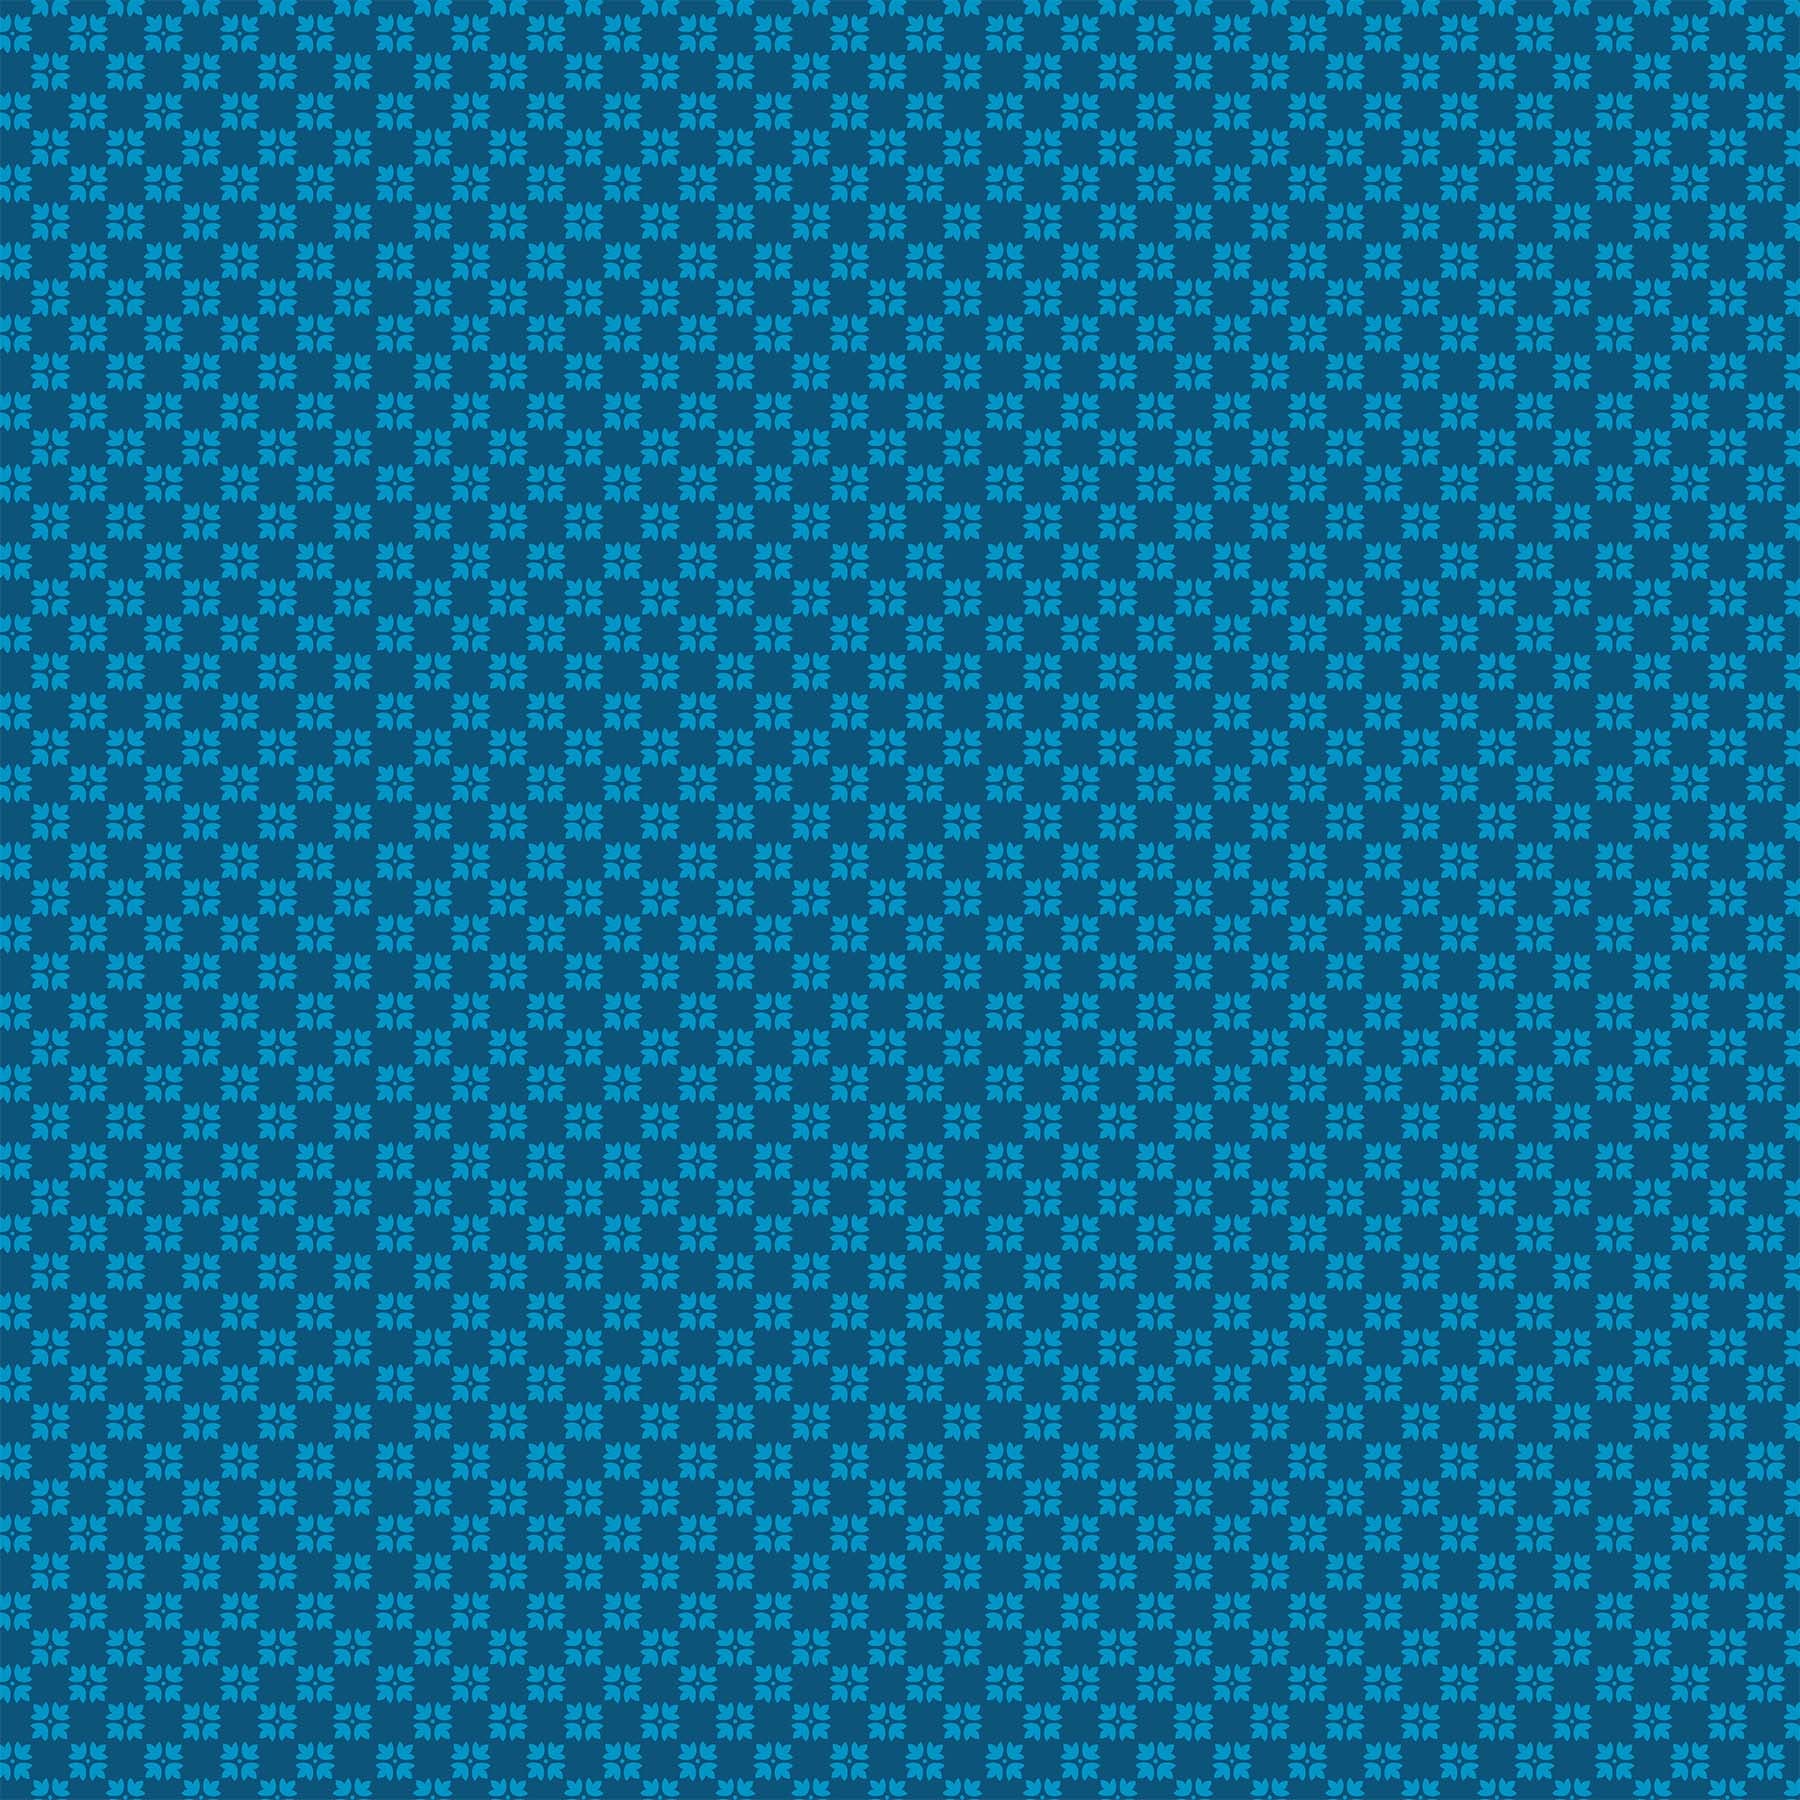 Hampton Court Quilt Fabric - Patterned Check in Teal - 90591-64